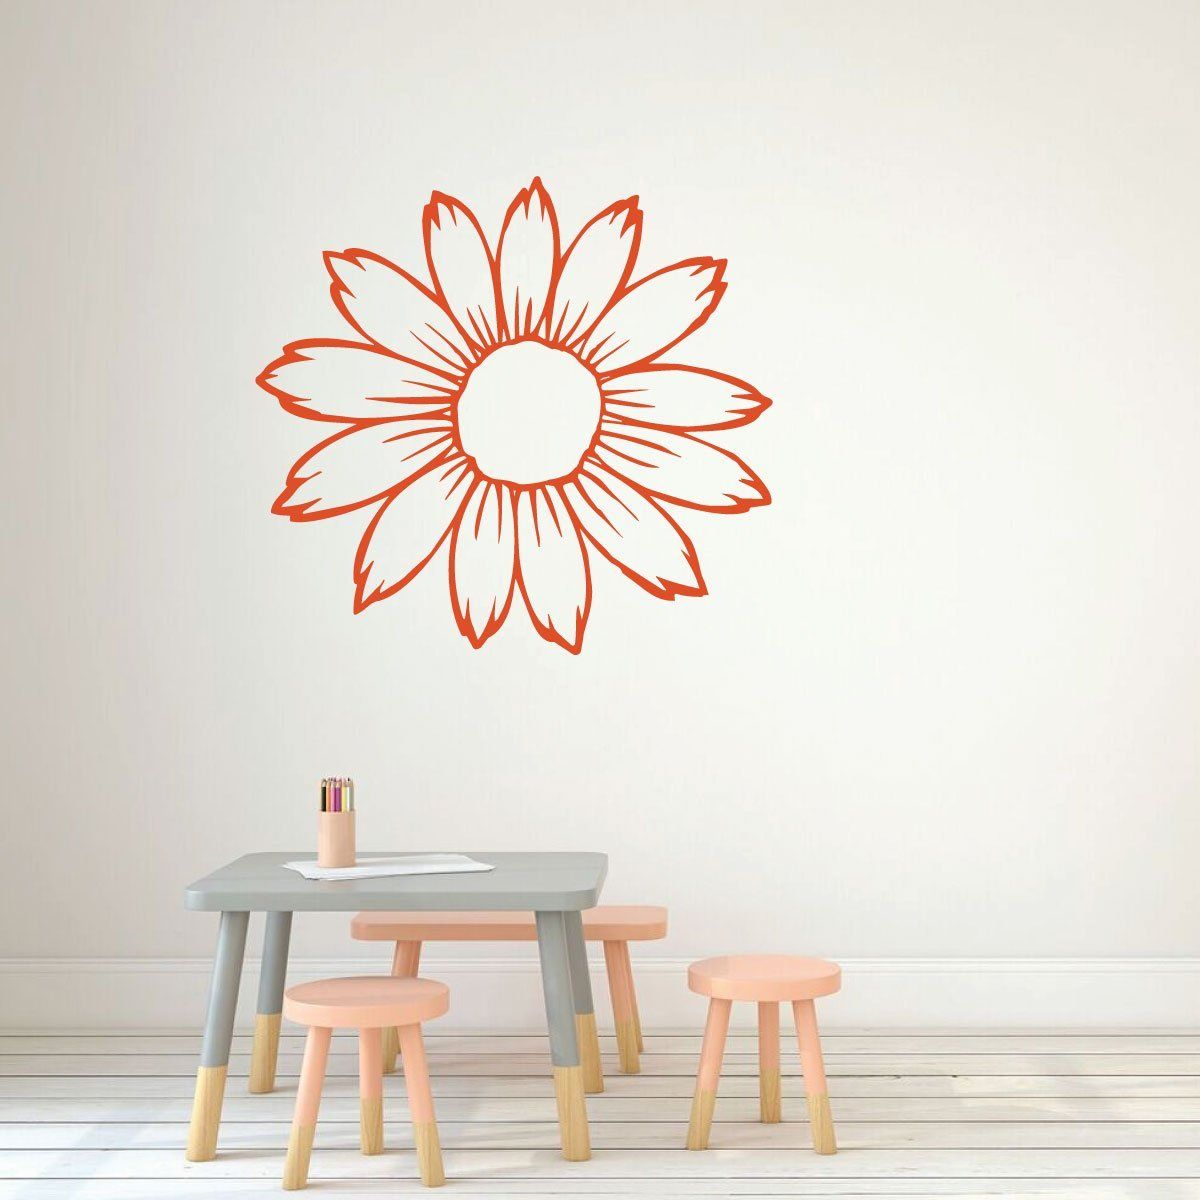 Sunflower Wall Decal Silhouette Vinyl Decor Wall Decal Regarding Most Up To Date Stripes Wall Art (Gallery 20 of 20)